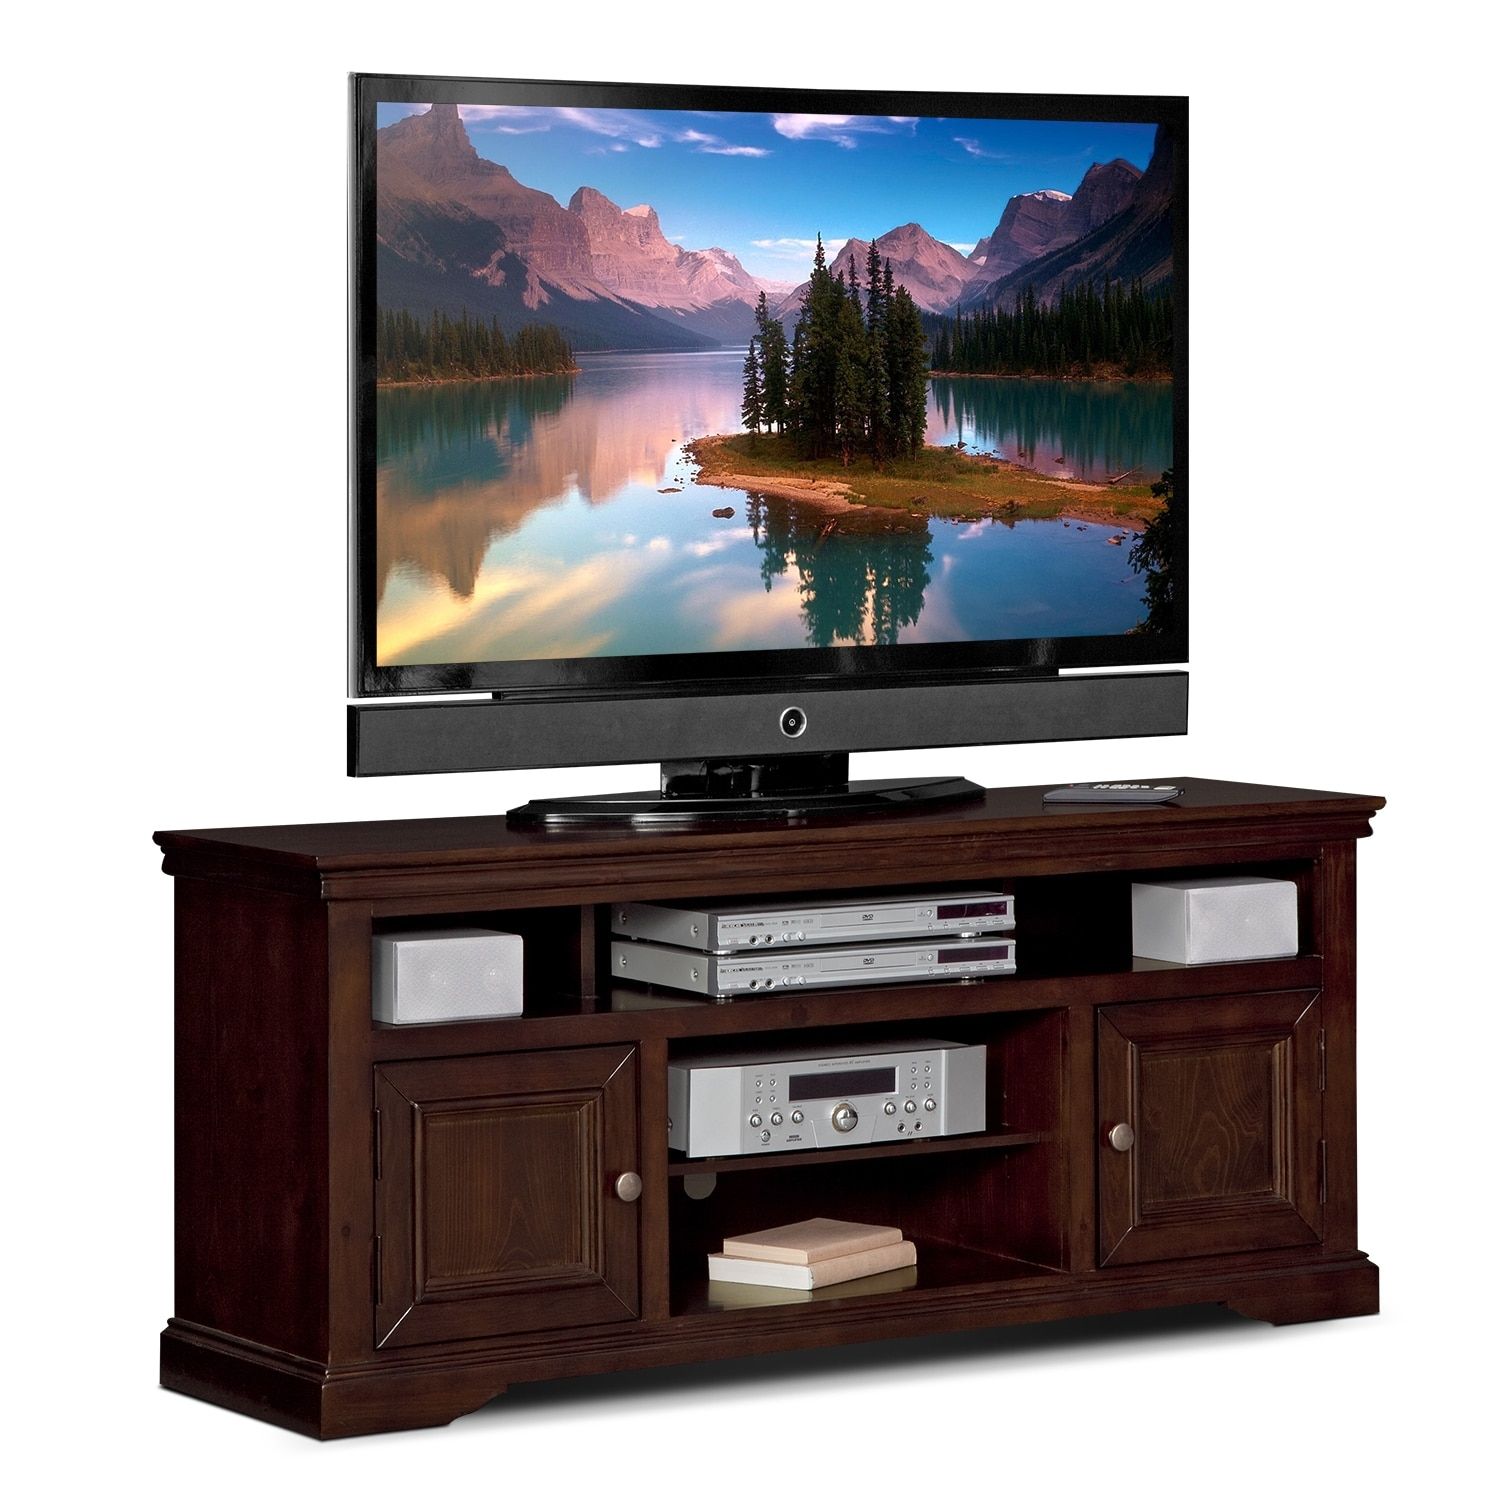 Jenson 60" Tv Stand – Cherry | Value City Furniture And Within Cherry Wood Tv Cabinets (View 5 of 15)